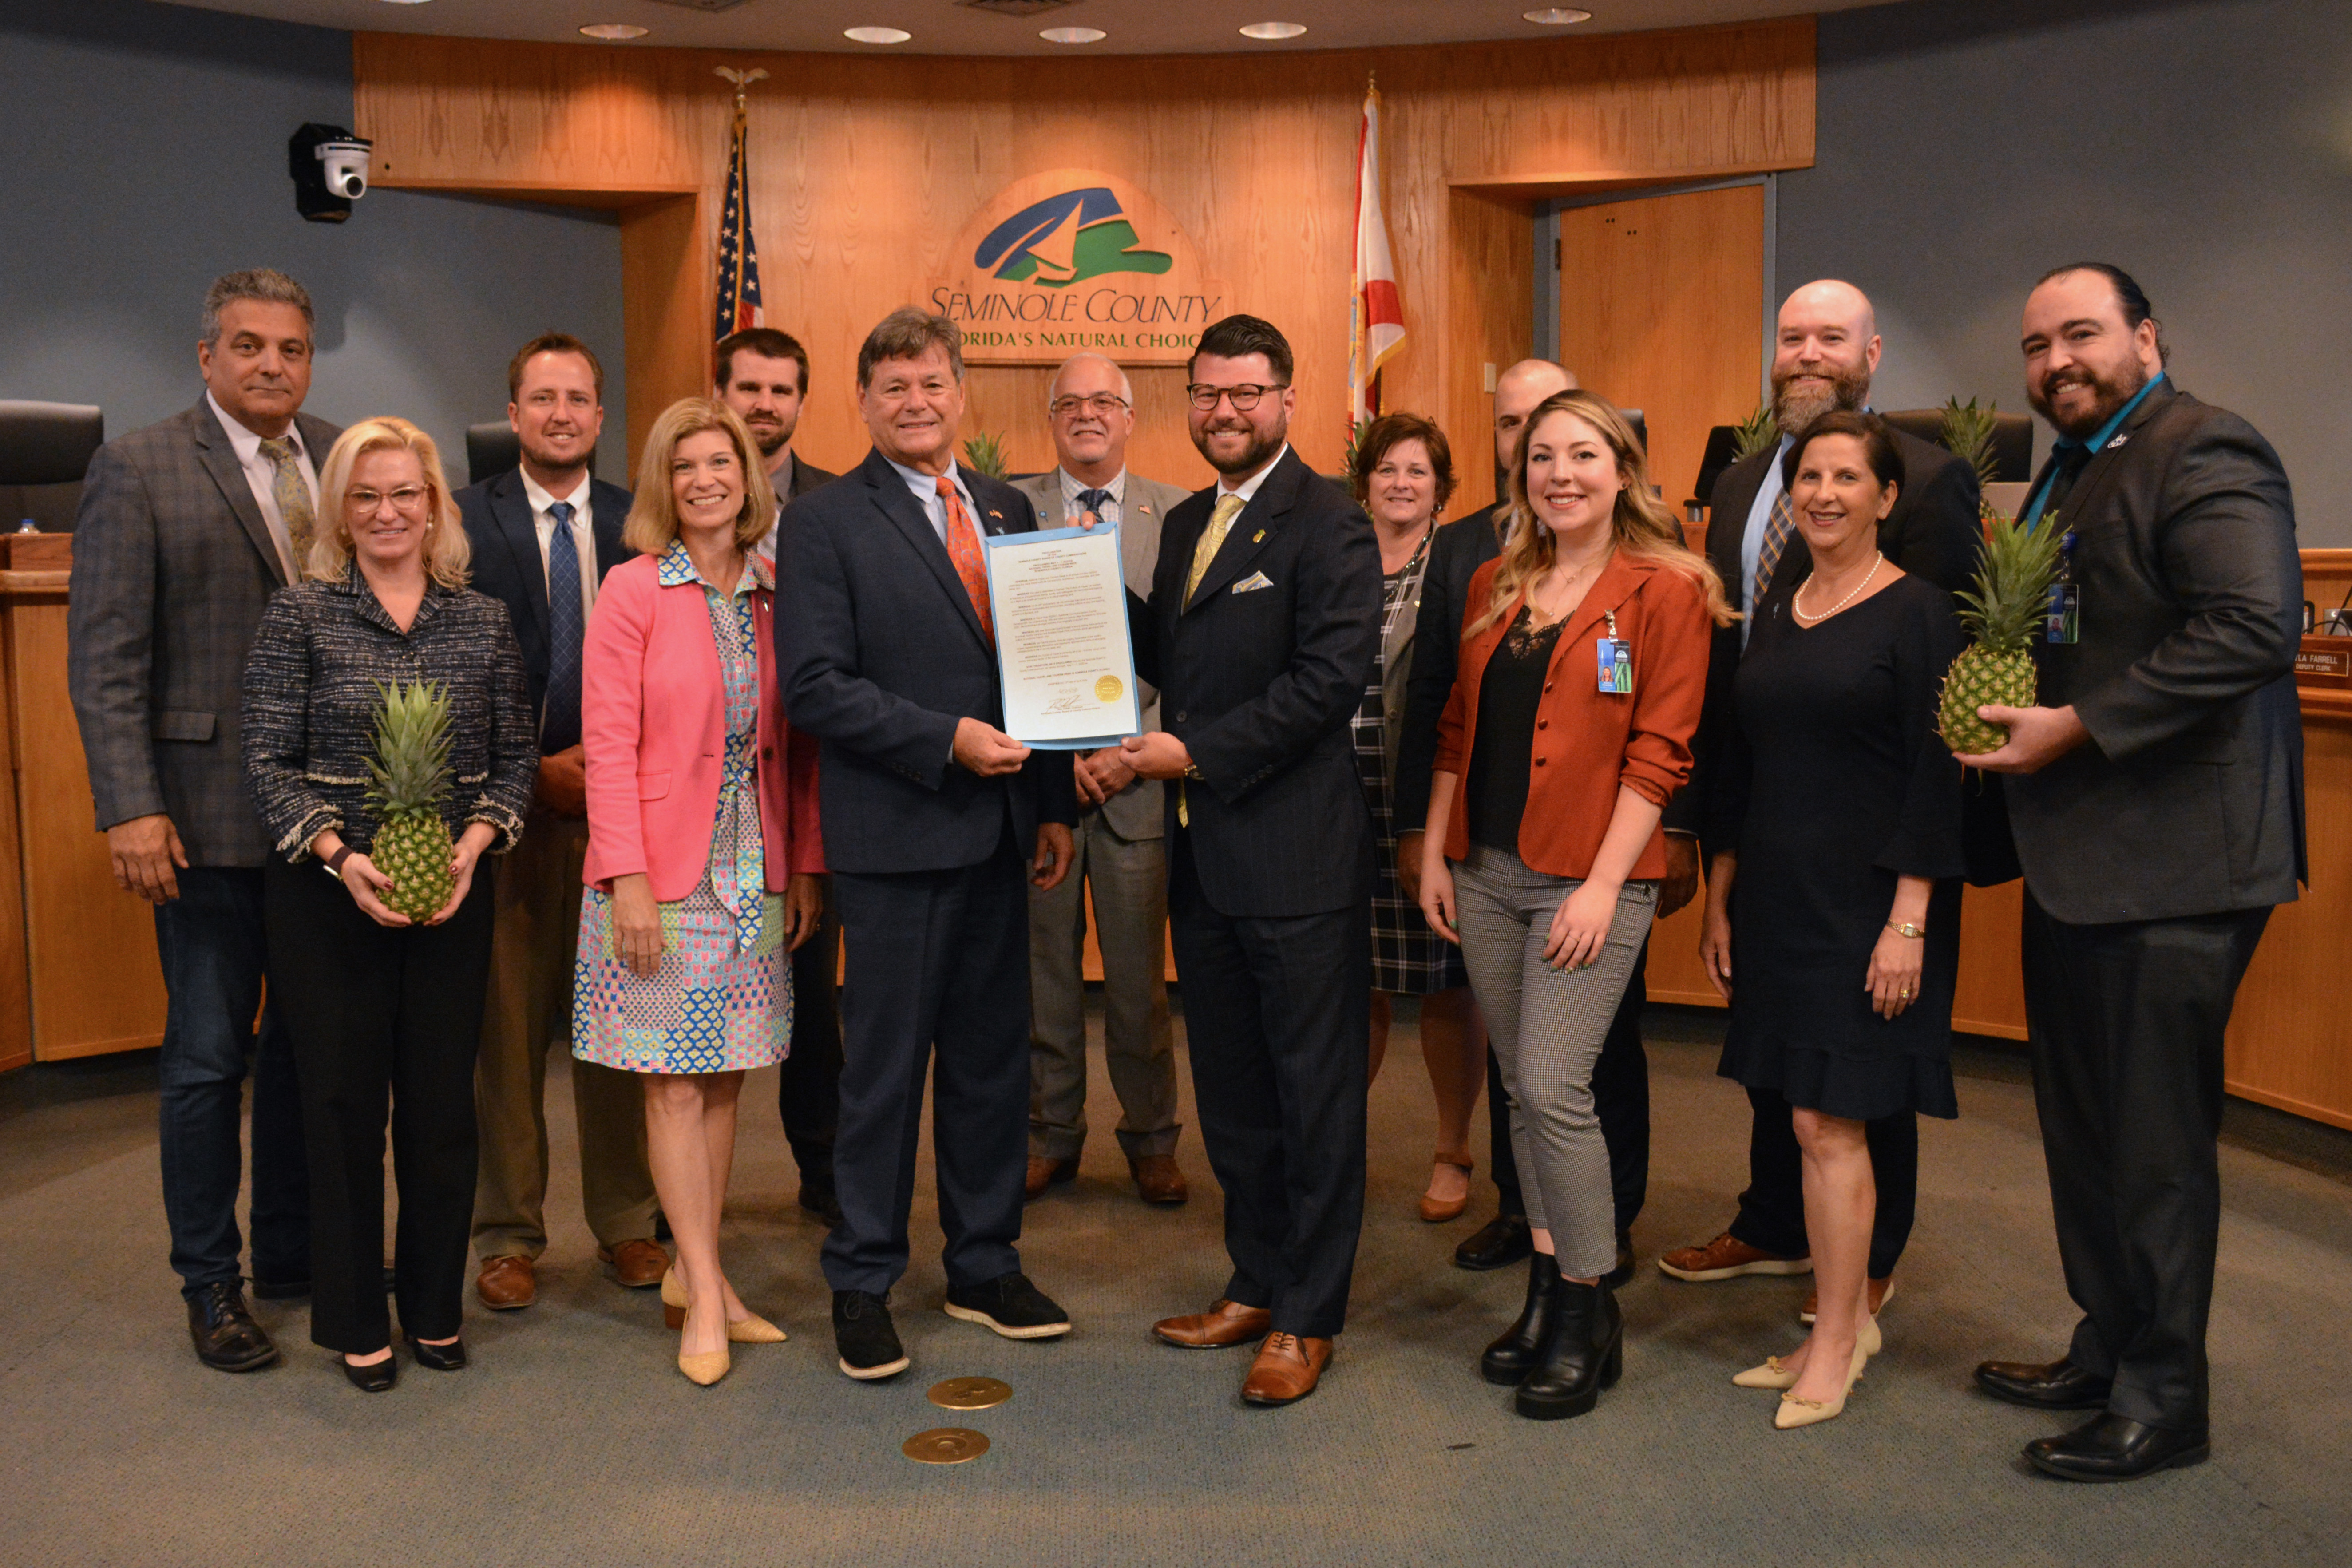 Proclamation - Proclaiming the week of May 1 - 7 as National Travel and Tourism Week in Seminole County (Robert Agrusa, President - CFHLA)